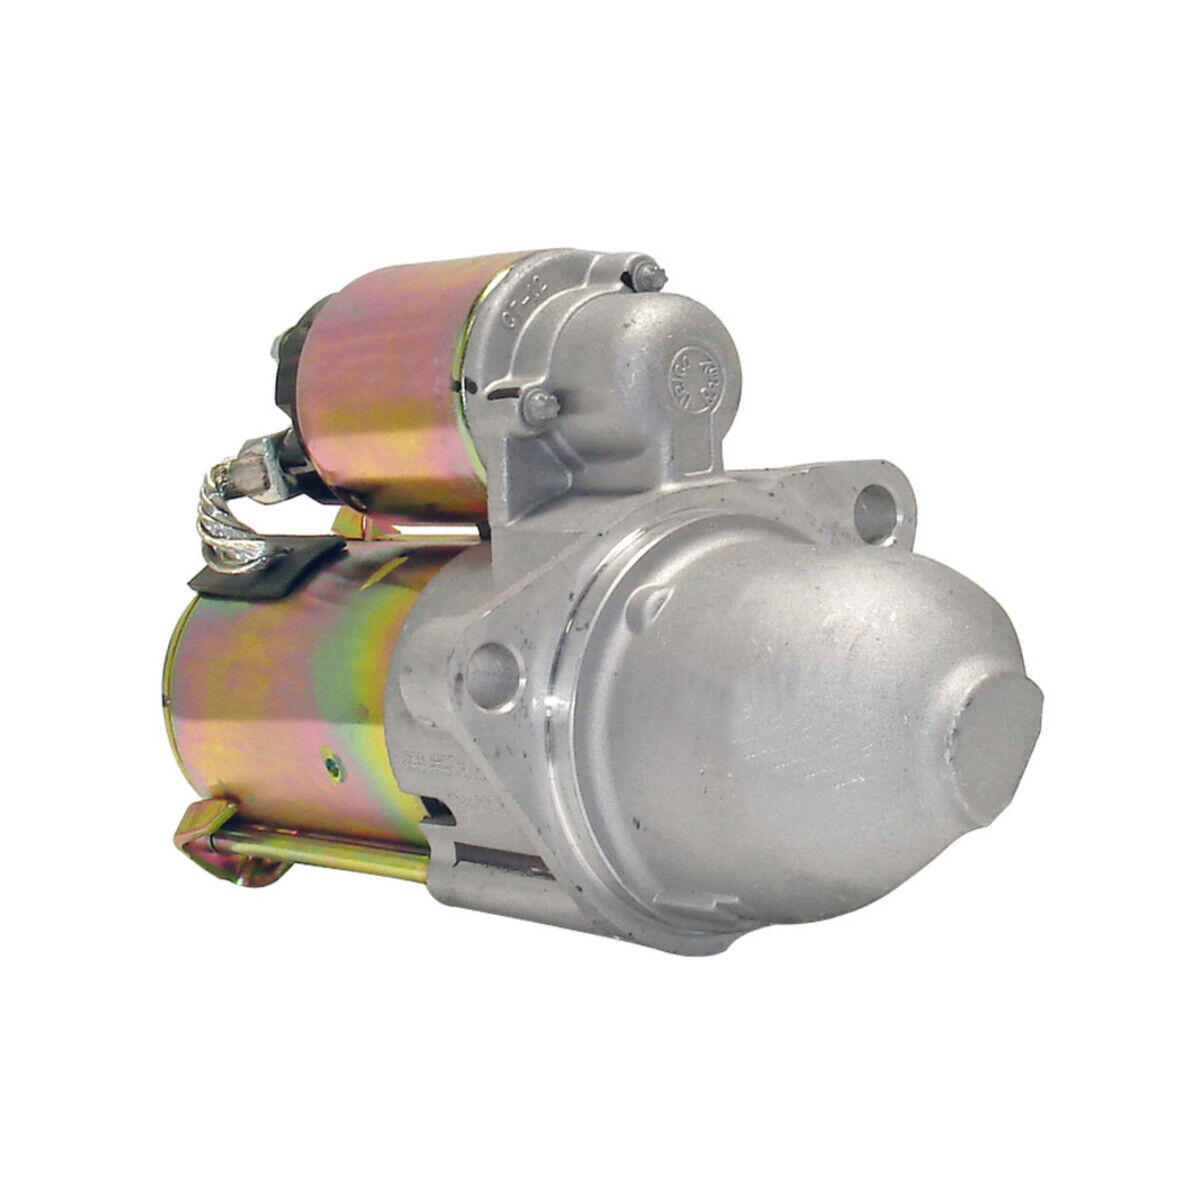 Remanufactured ACDelco Starter Motor 336-1933A 88864477